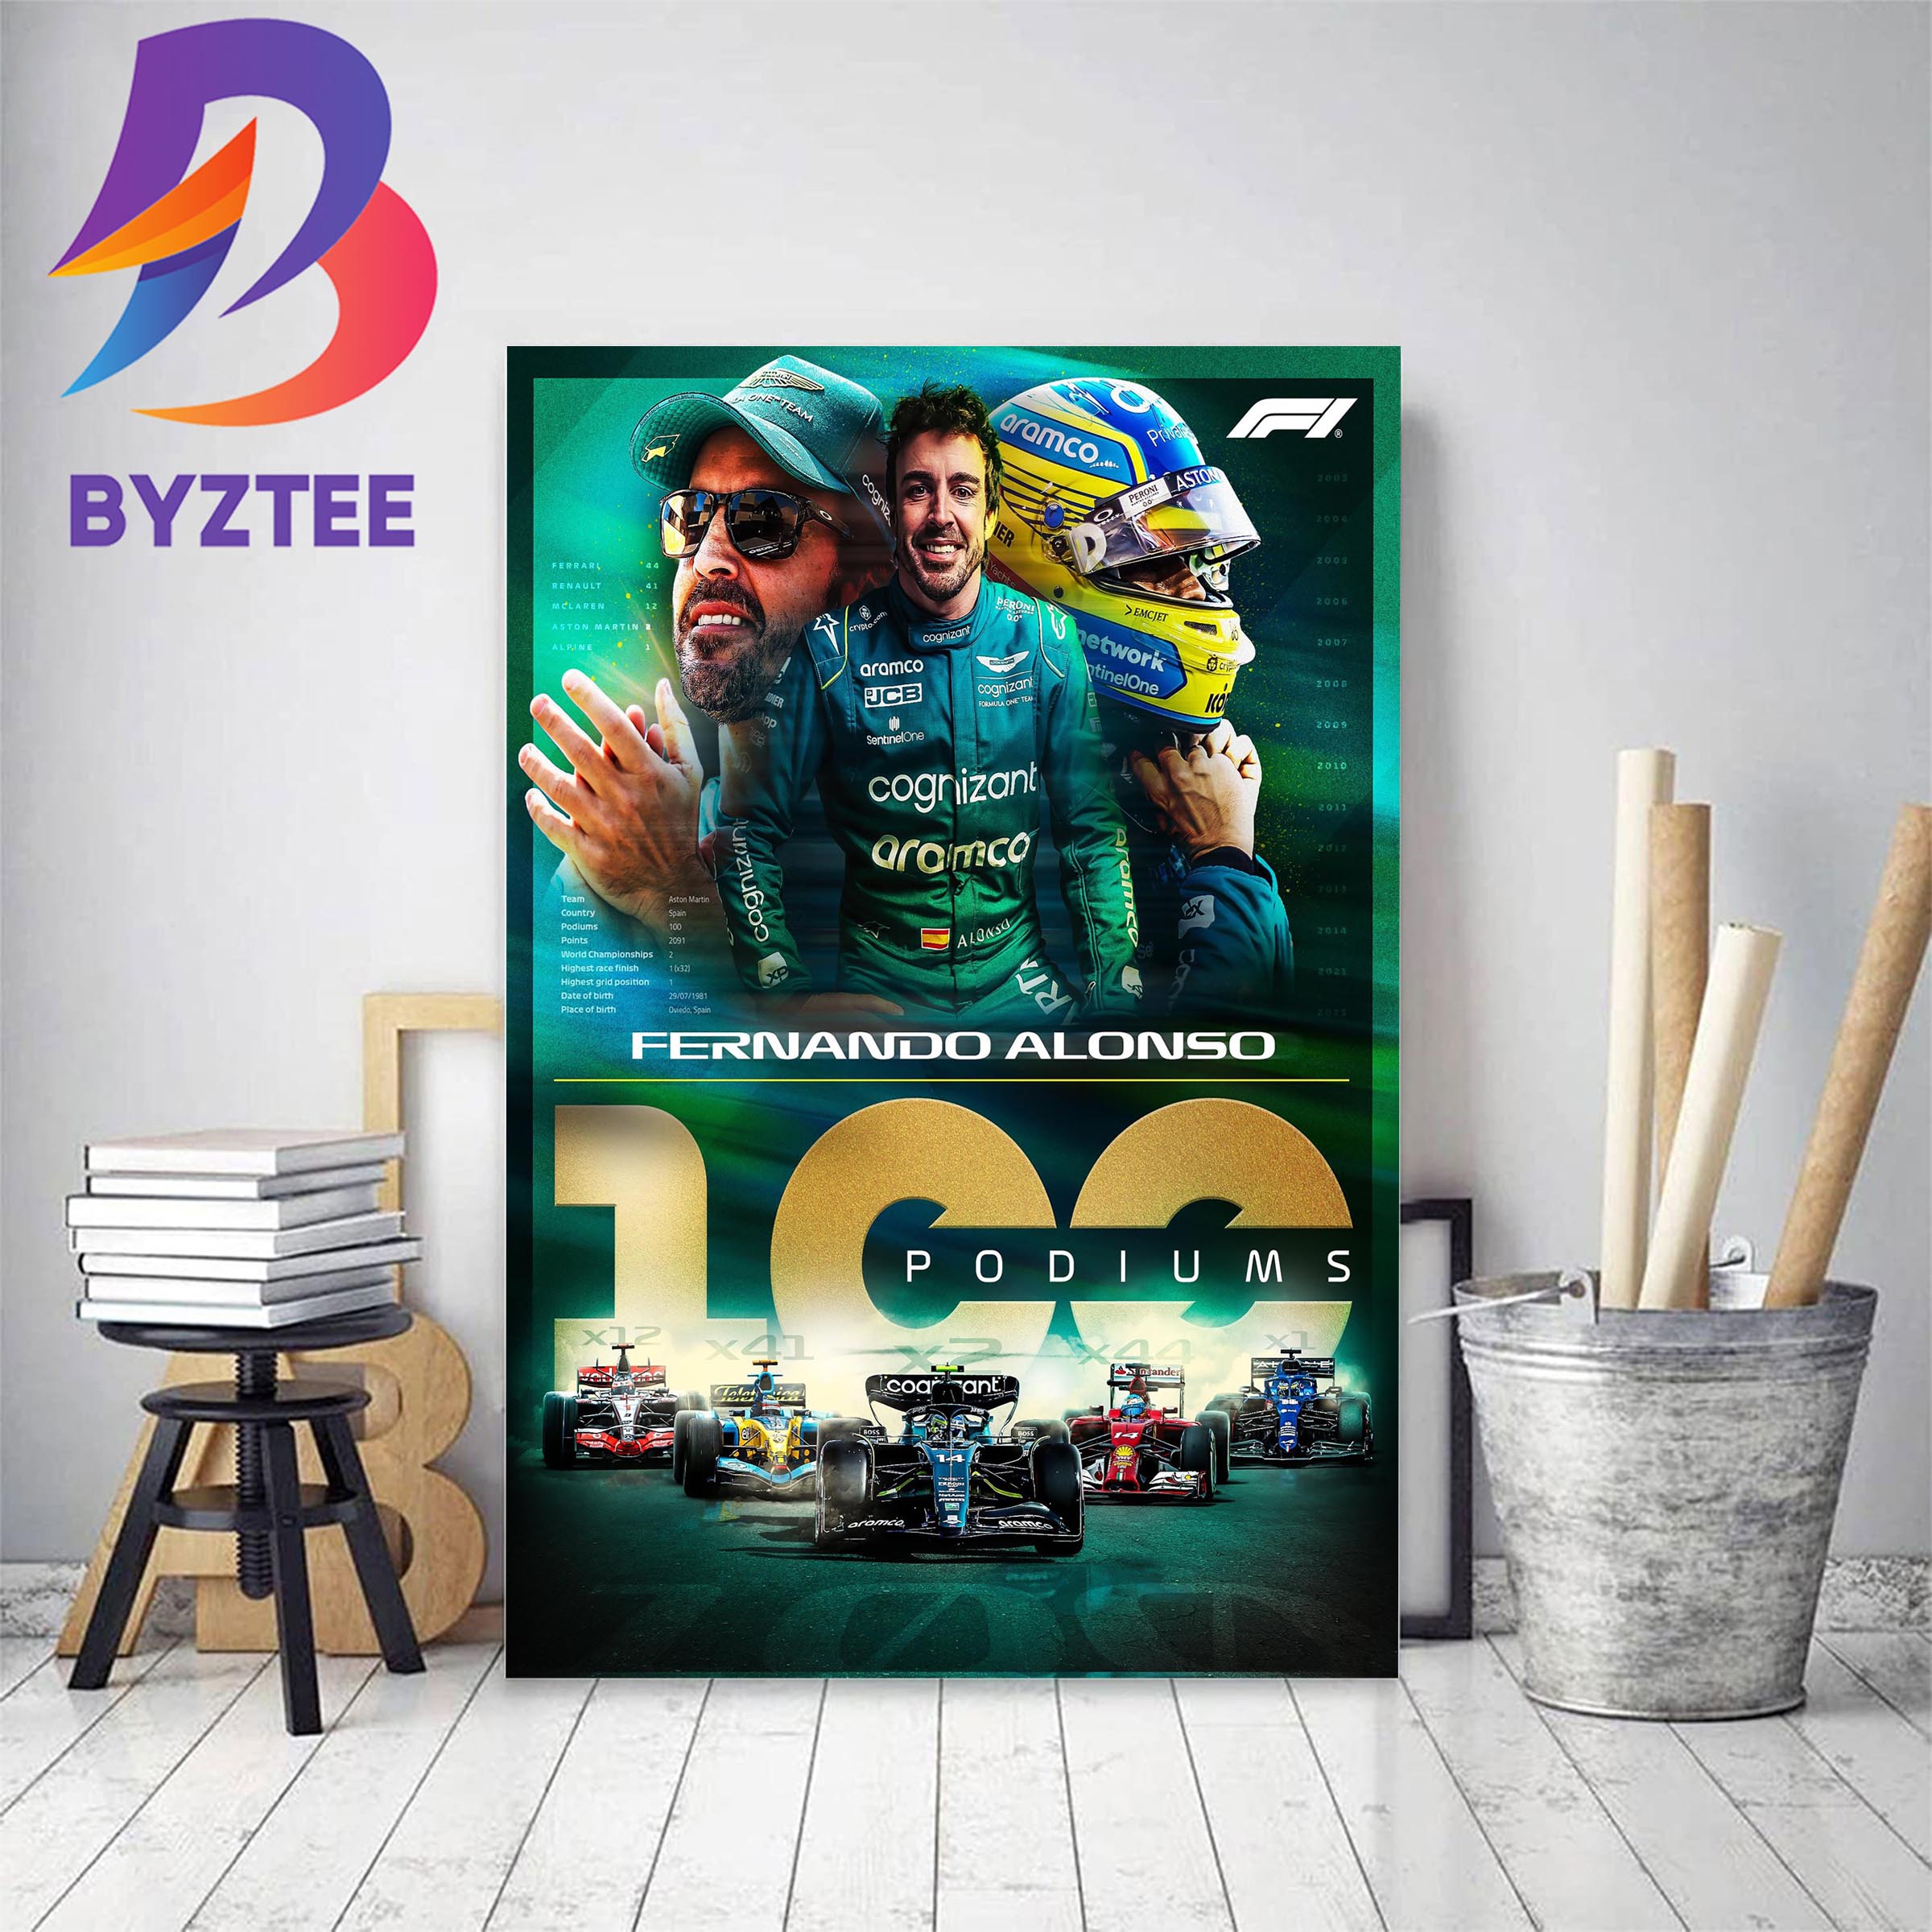 Fernando Alonso 100th Podium Reinstated Decor Poster Canvas - Byztee